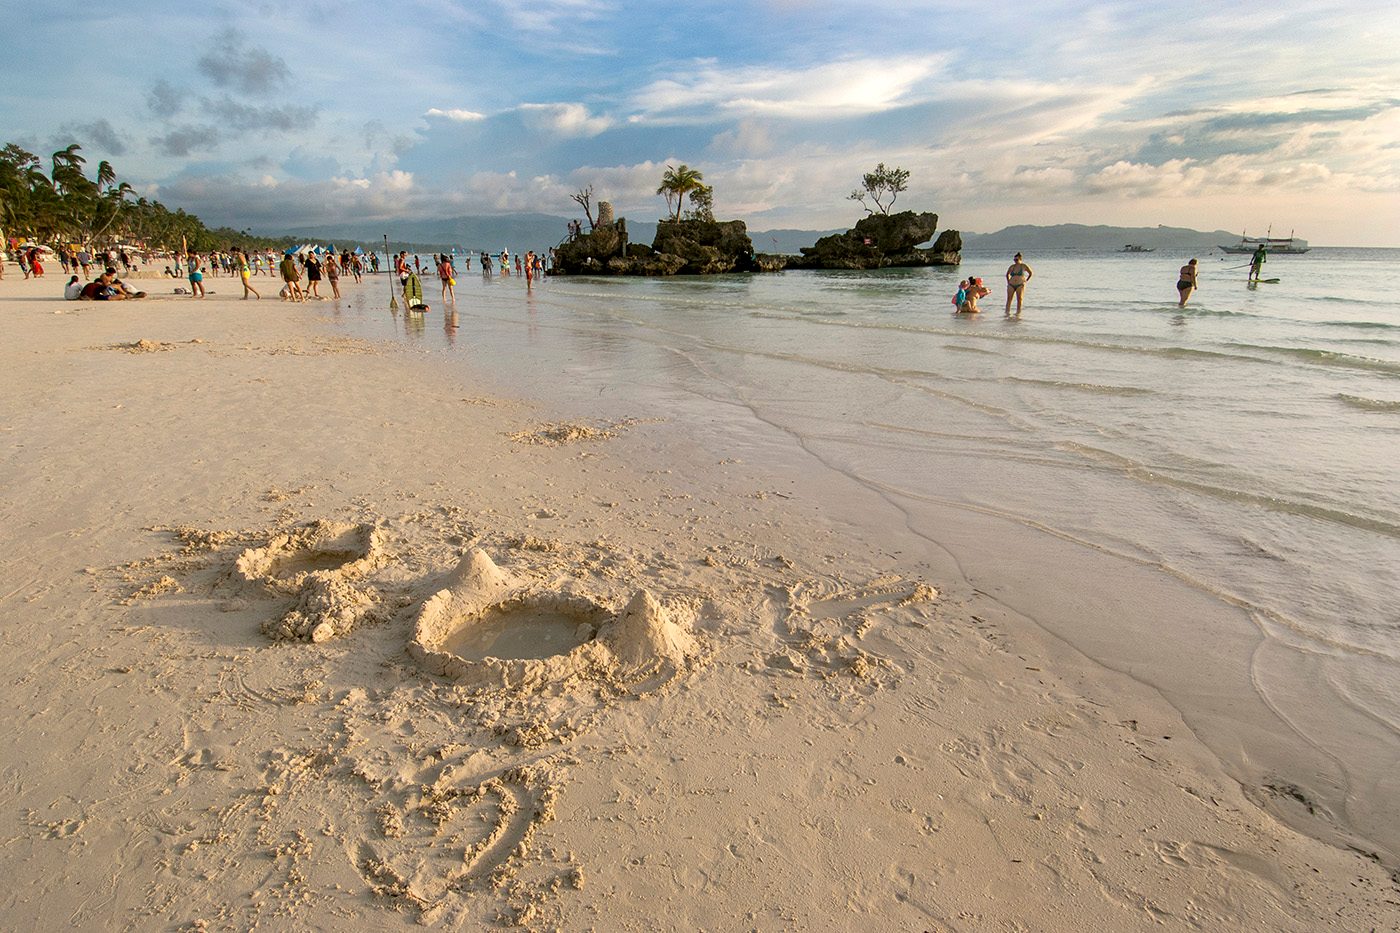 Philippines eyes limiting Boracay tourists after 6-month closure